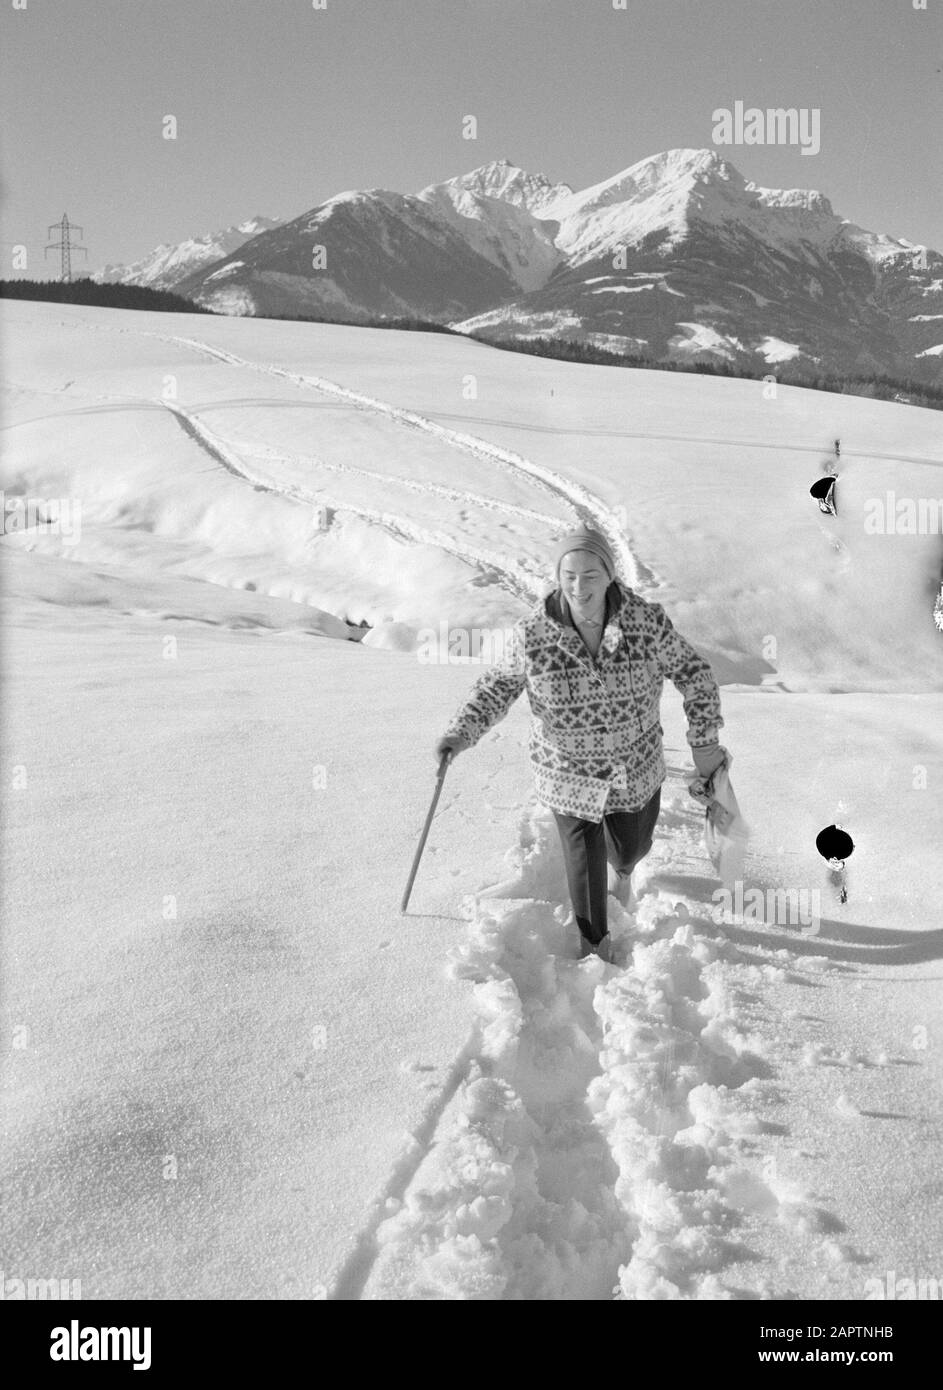 Winter in Tyrol  Hilde Eschen walks in the snow with in the background the Karwendel Mountains Date: January 1960 Location: Austria, Sistrans, Tyrol Keywords: mountains, landscapes, snow, holiday, hiking, winter Personal name: Echen, Hilde Stock Photo